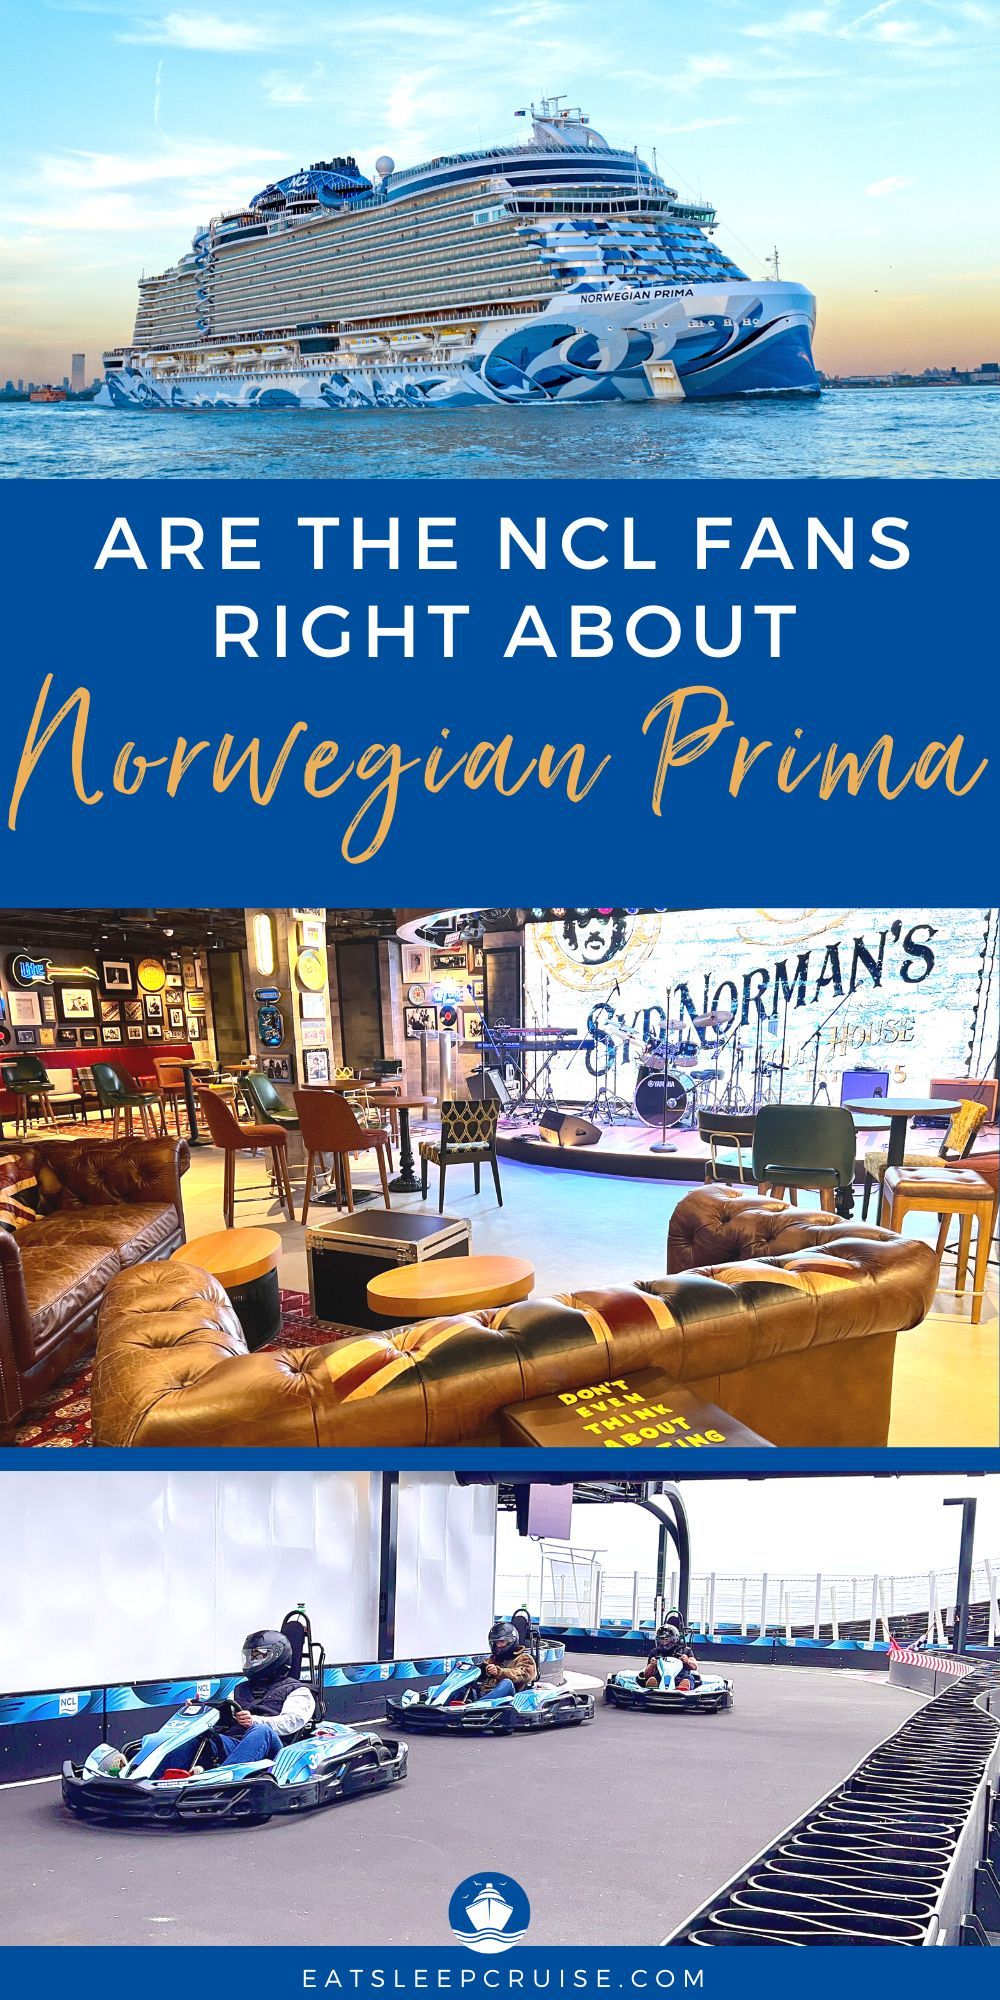 Are the Fans Right About Norwegian Prima